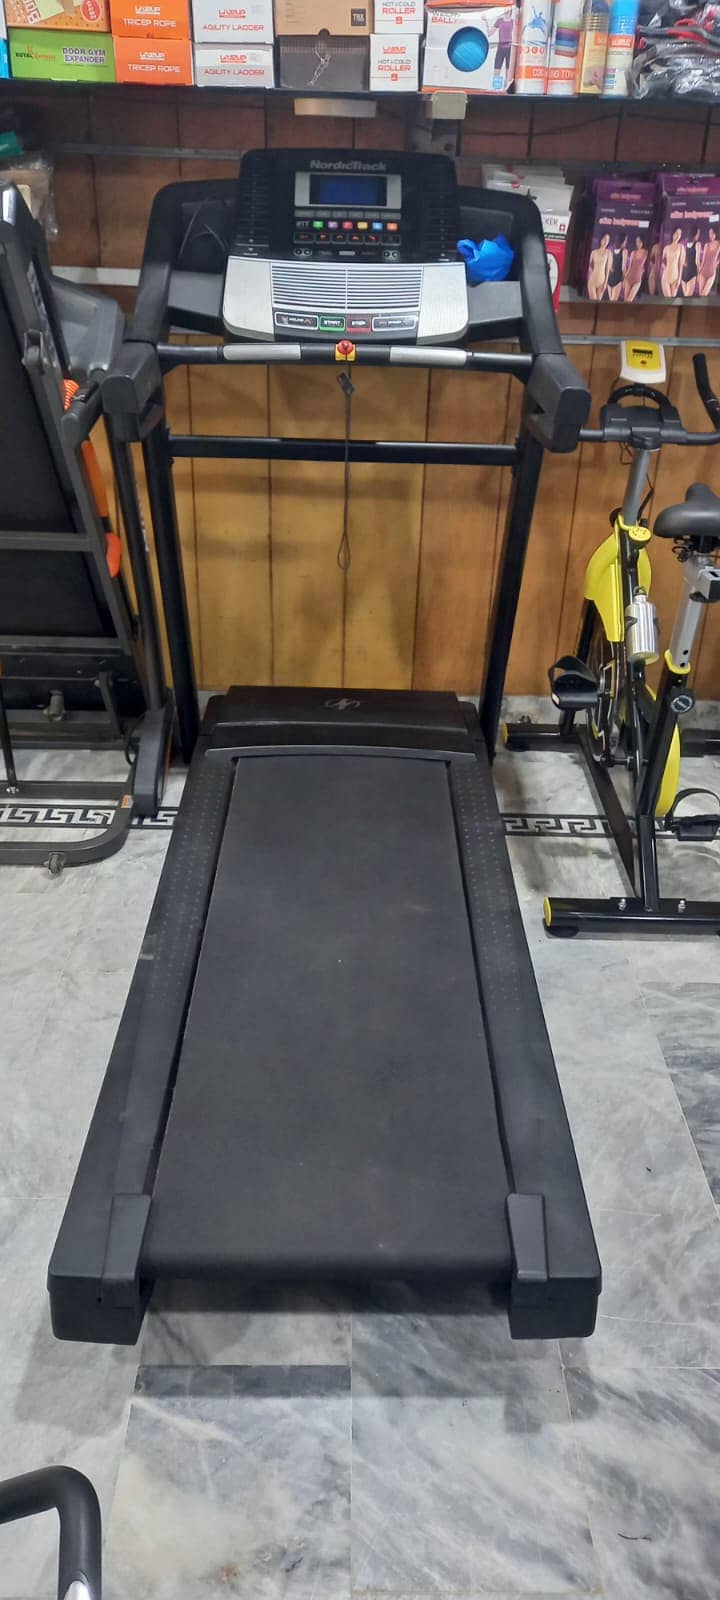 Used Running treadmill Machine Exellent Condition (ASIA FITNESS) 4